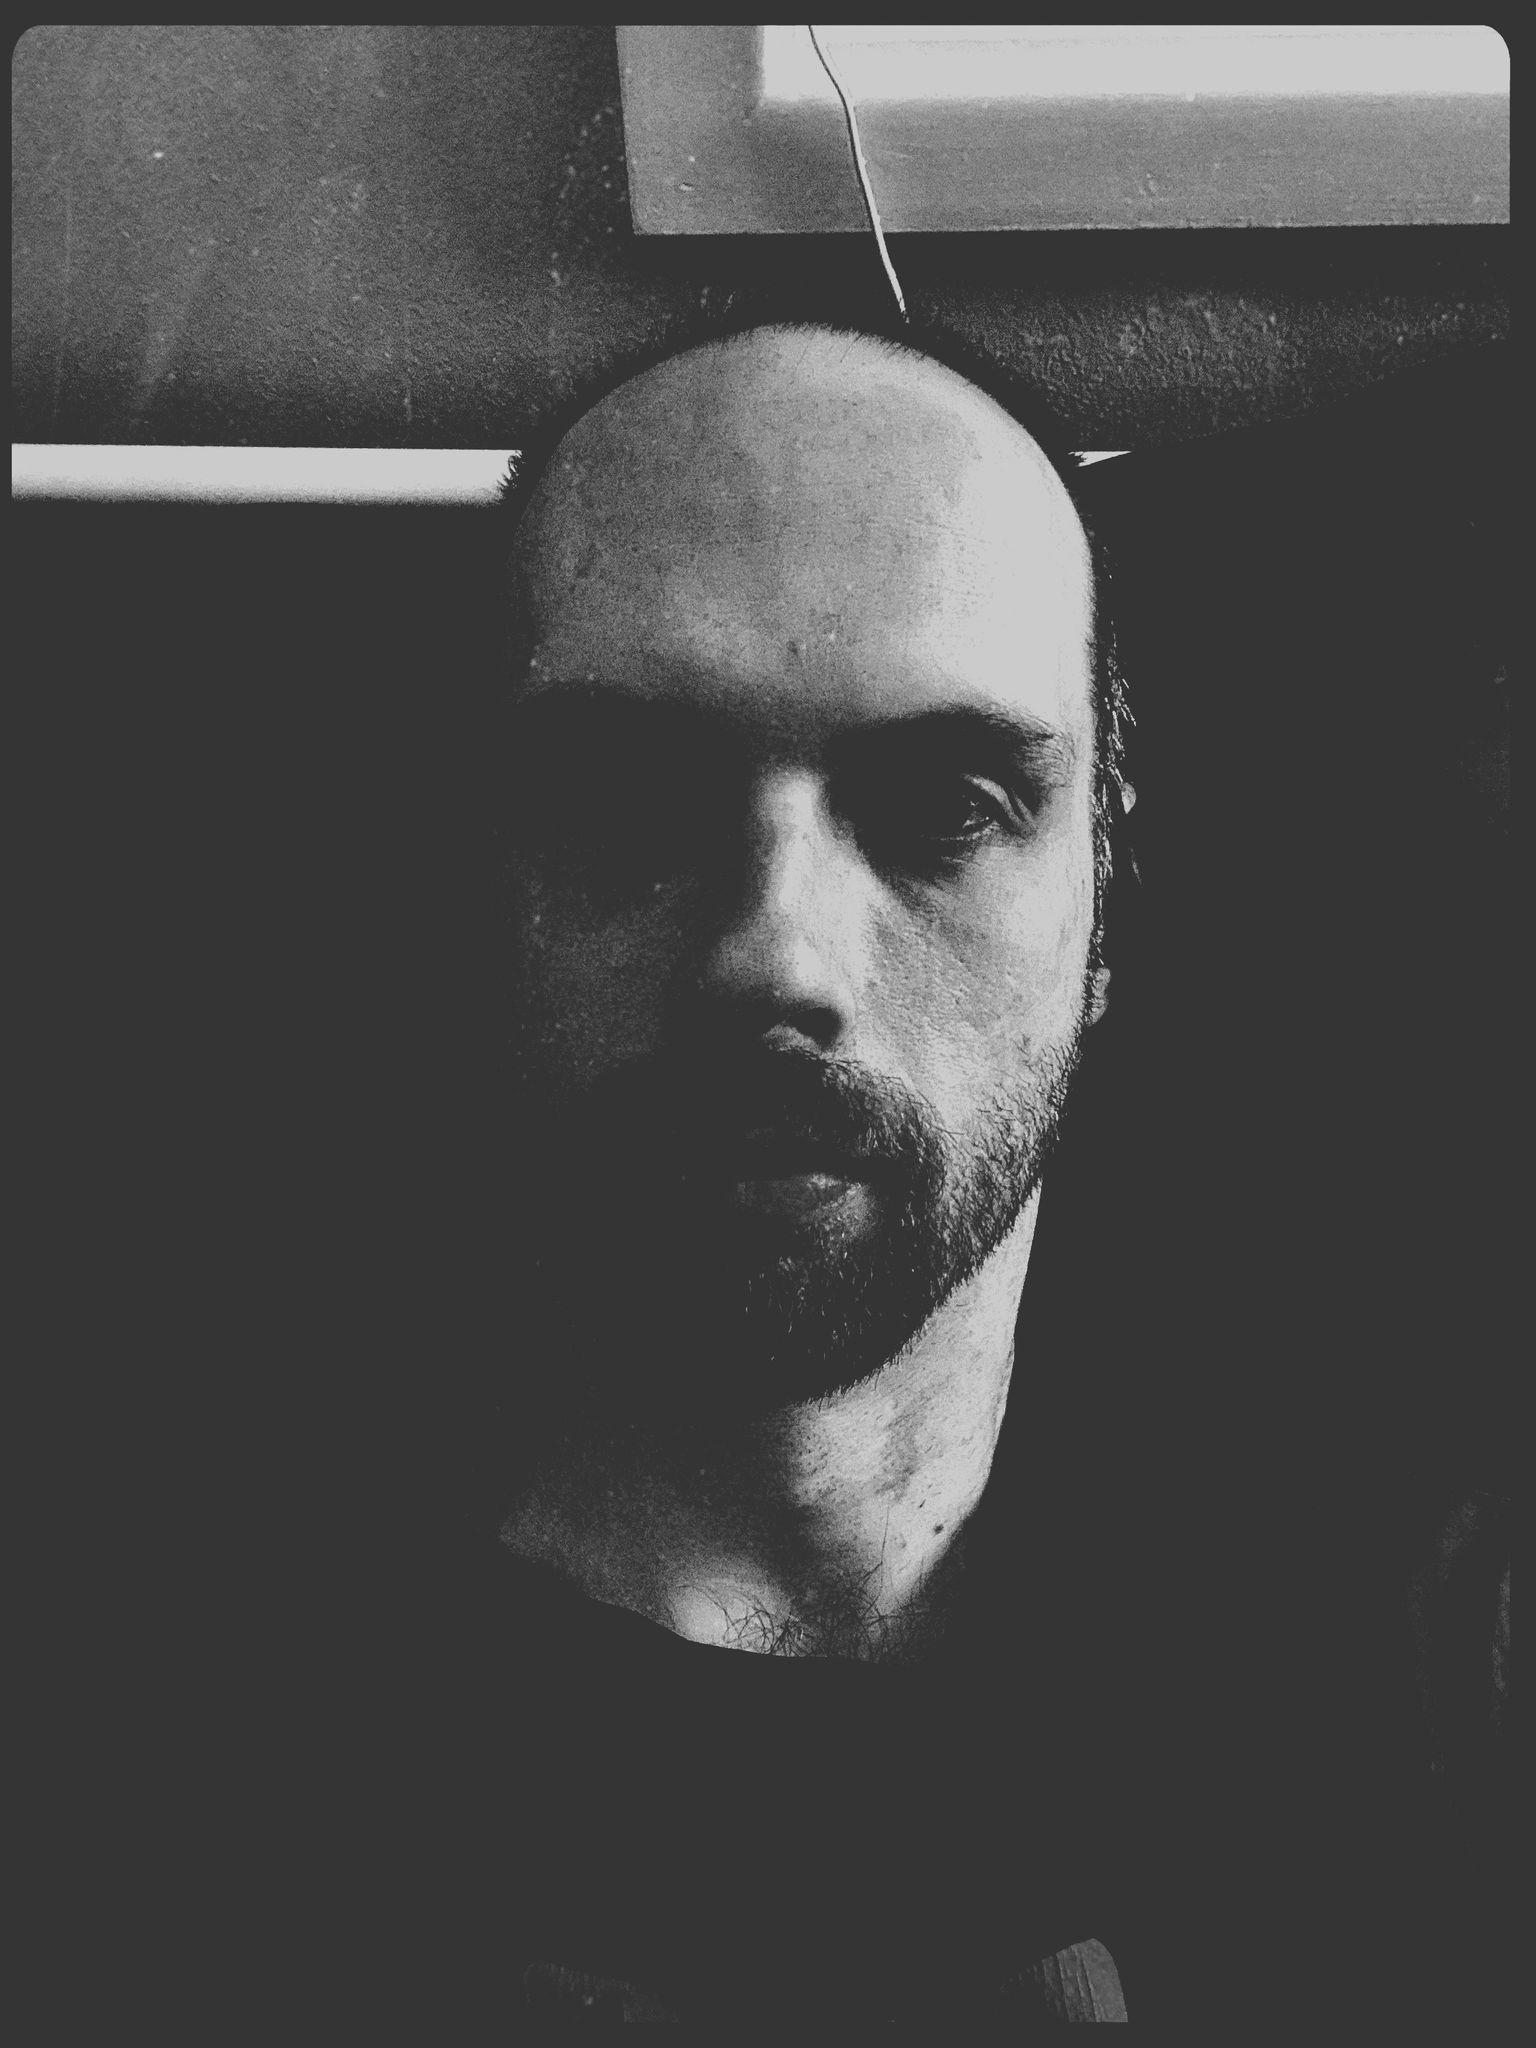 A selfie of me, a white man with a receeding hairline, a goatee, and the beginnings of a full beard. The photo is extremely dark and in in black-and-white.